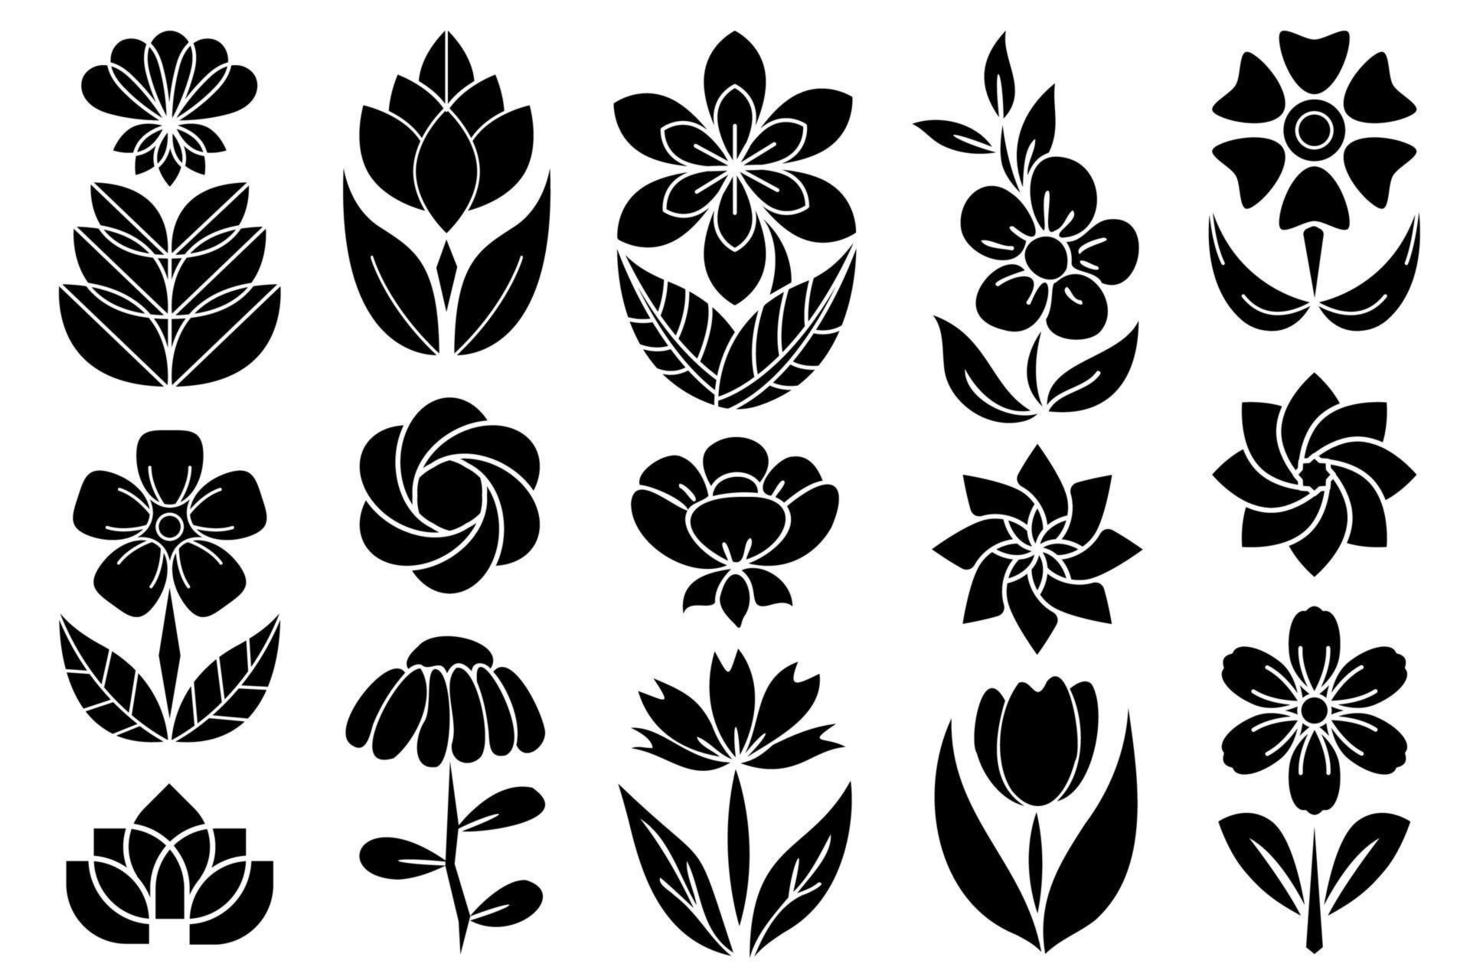 Flower clipart collection. Laser cut vector flowers for printing and cutting decorations, floral set with black shape leaves and petals.